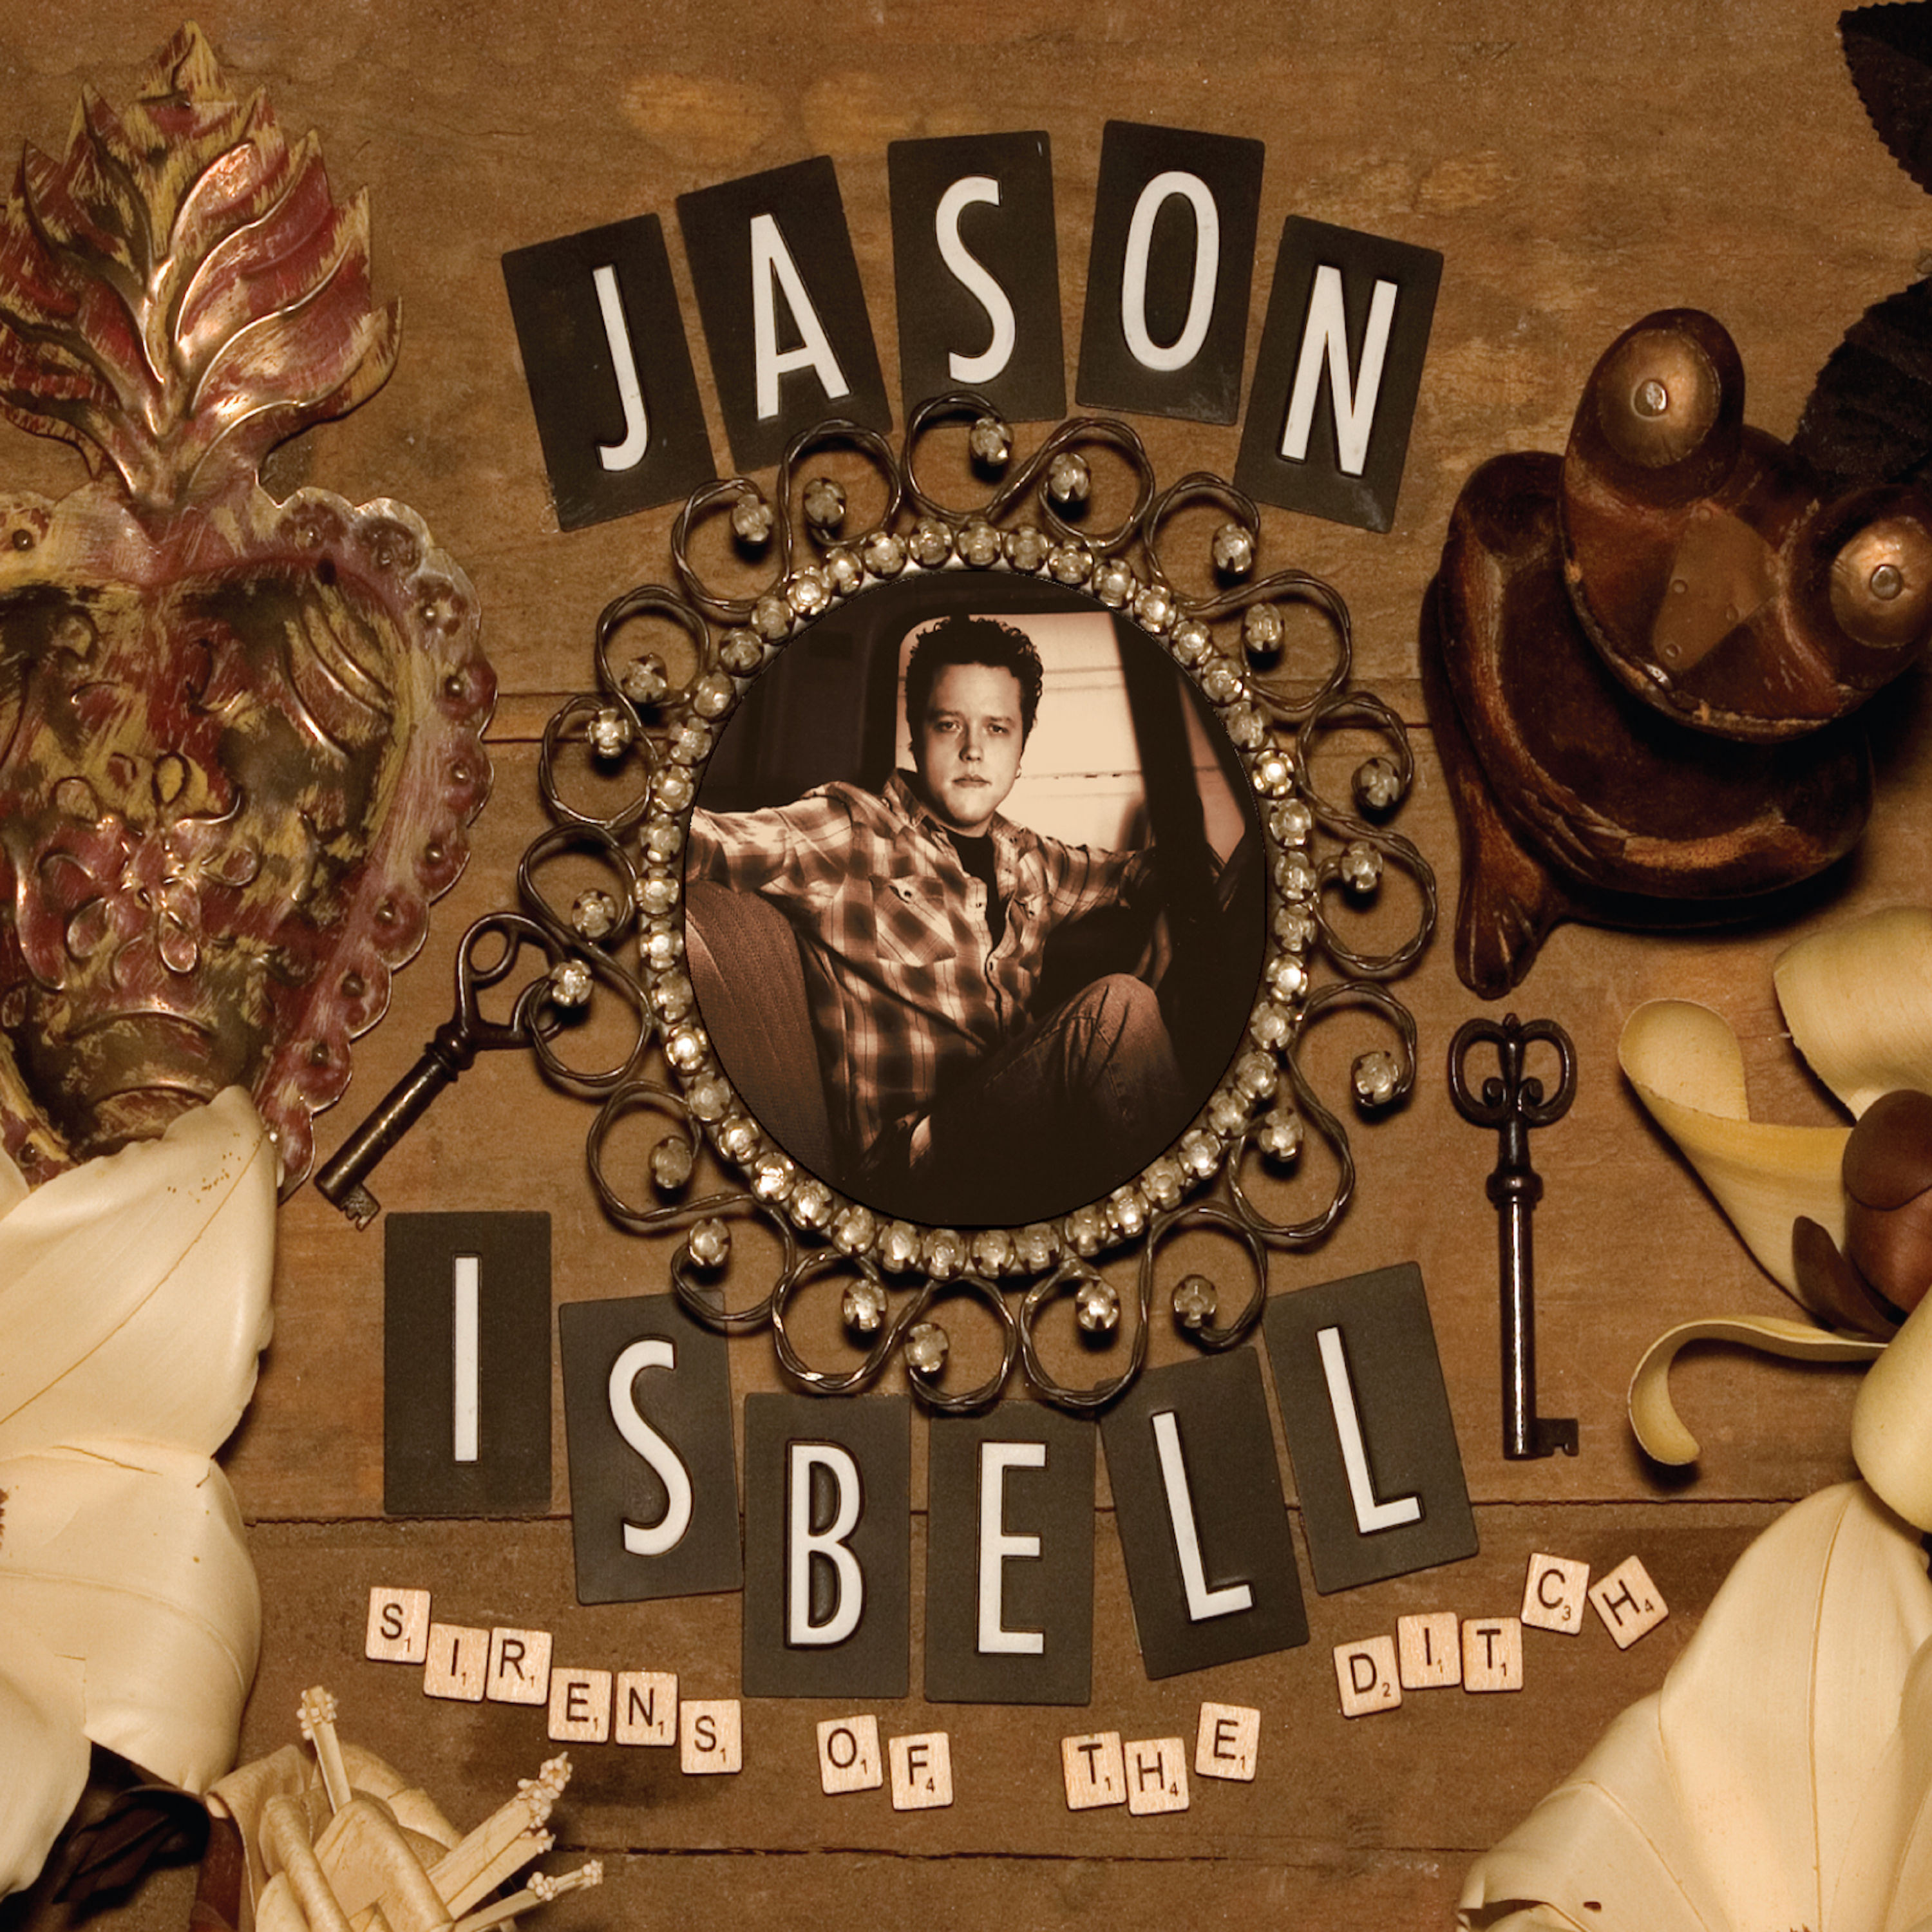 Jason Isbell - Sirens Of The Ditch (Deluxe Edition) (2018) [FLAC 24bit/44,1kHz]